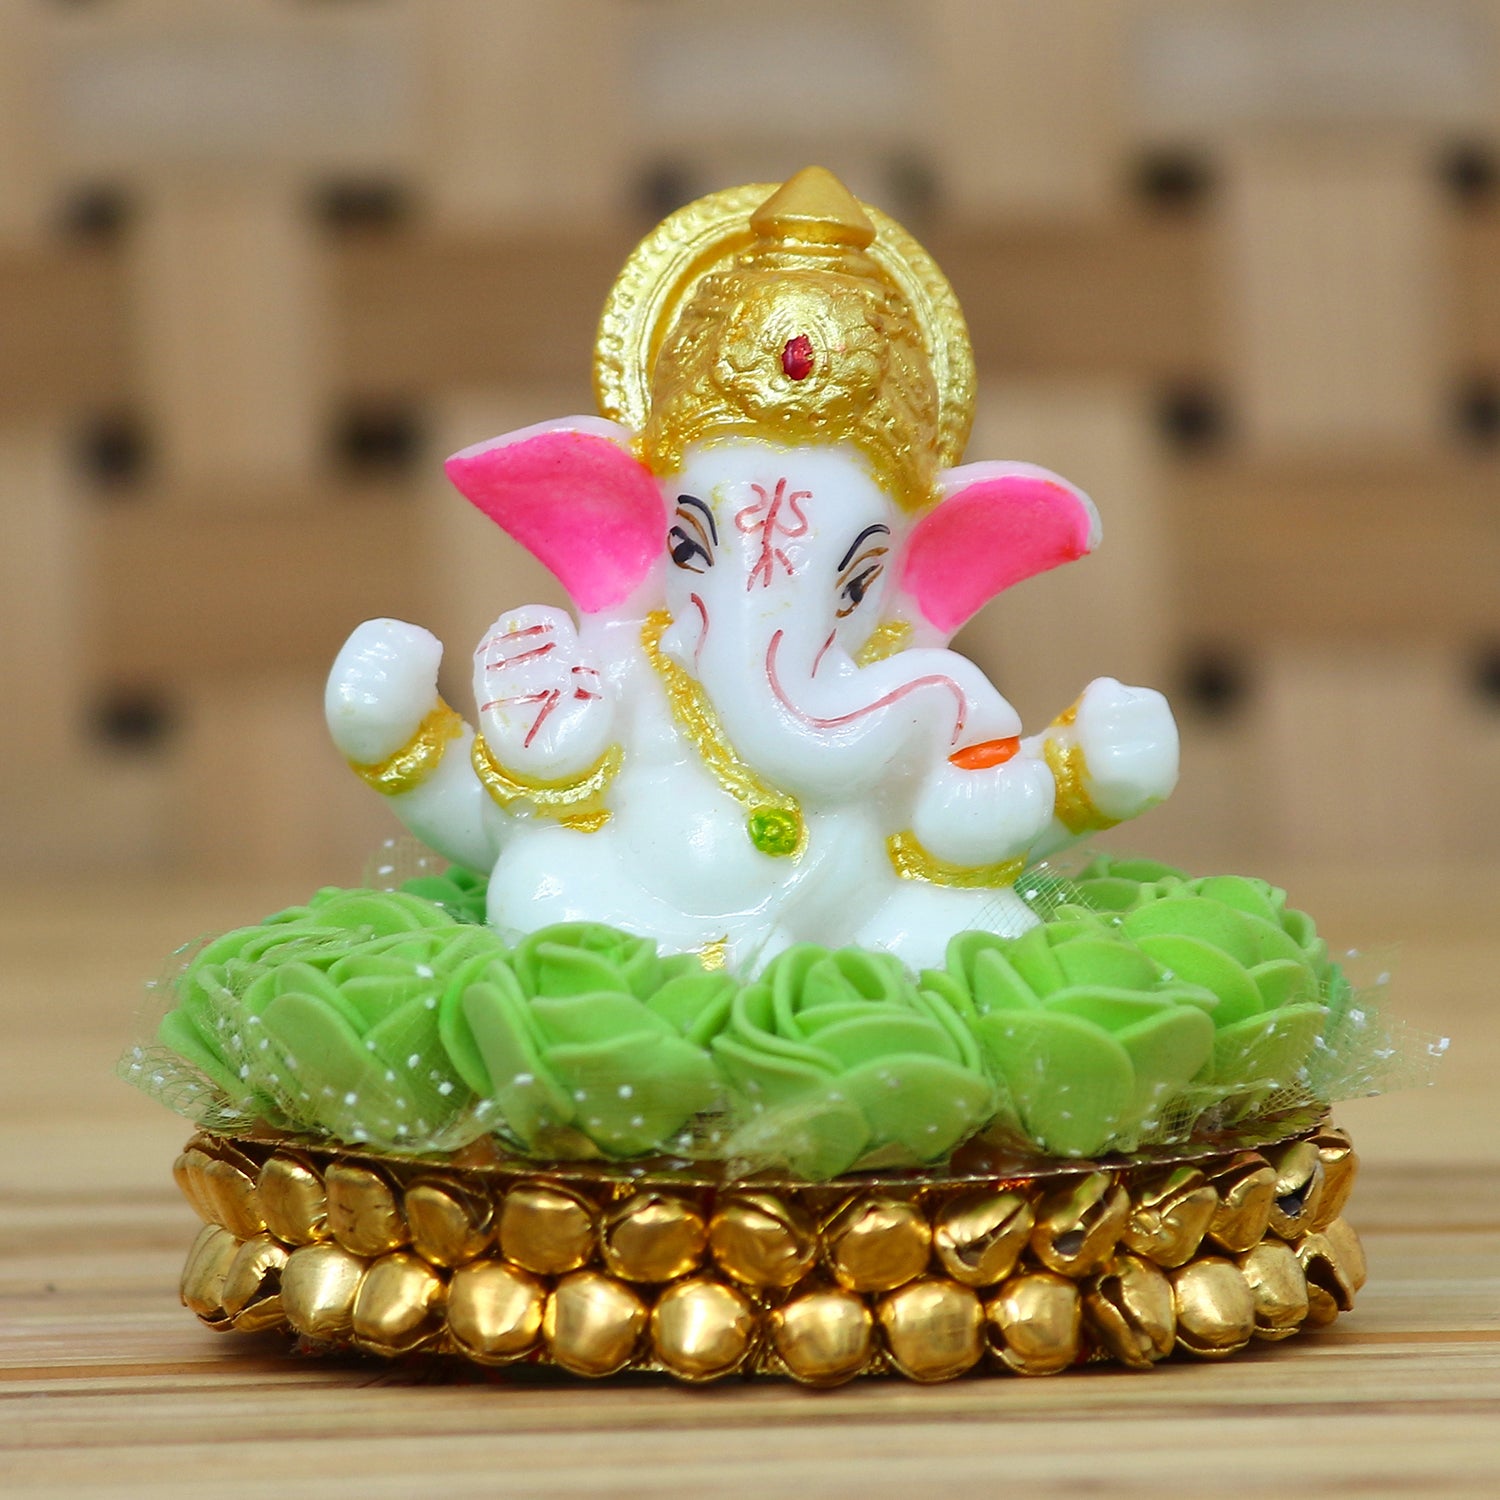 Lord Ganesha Idol on Decorative Handcrafted Plate with Green Flowers 1